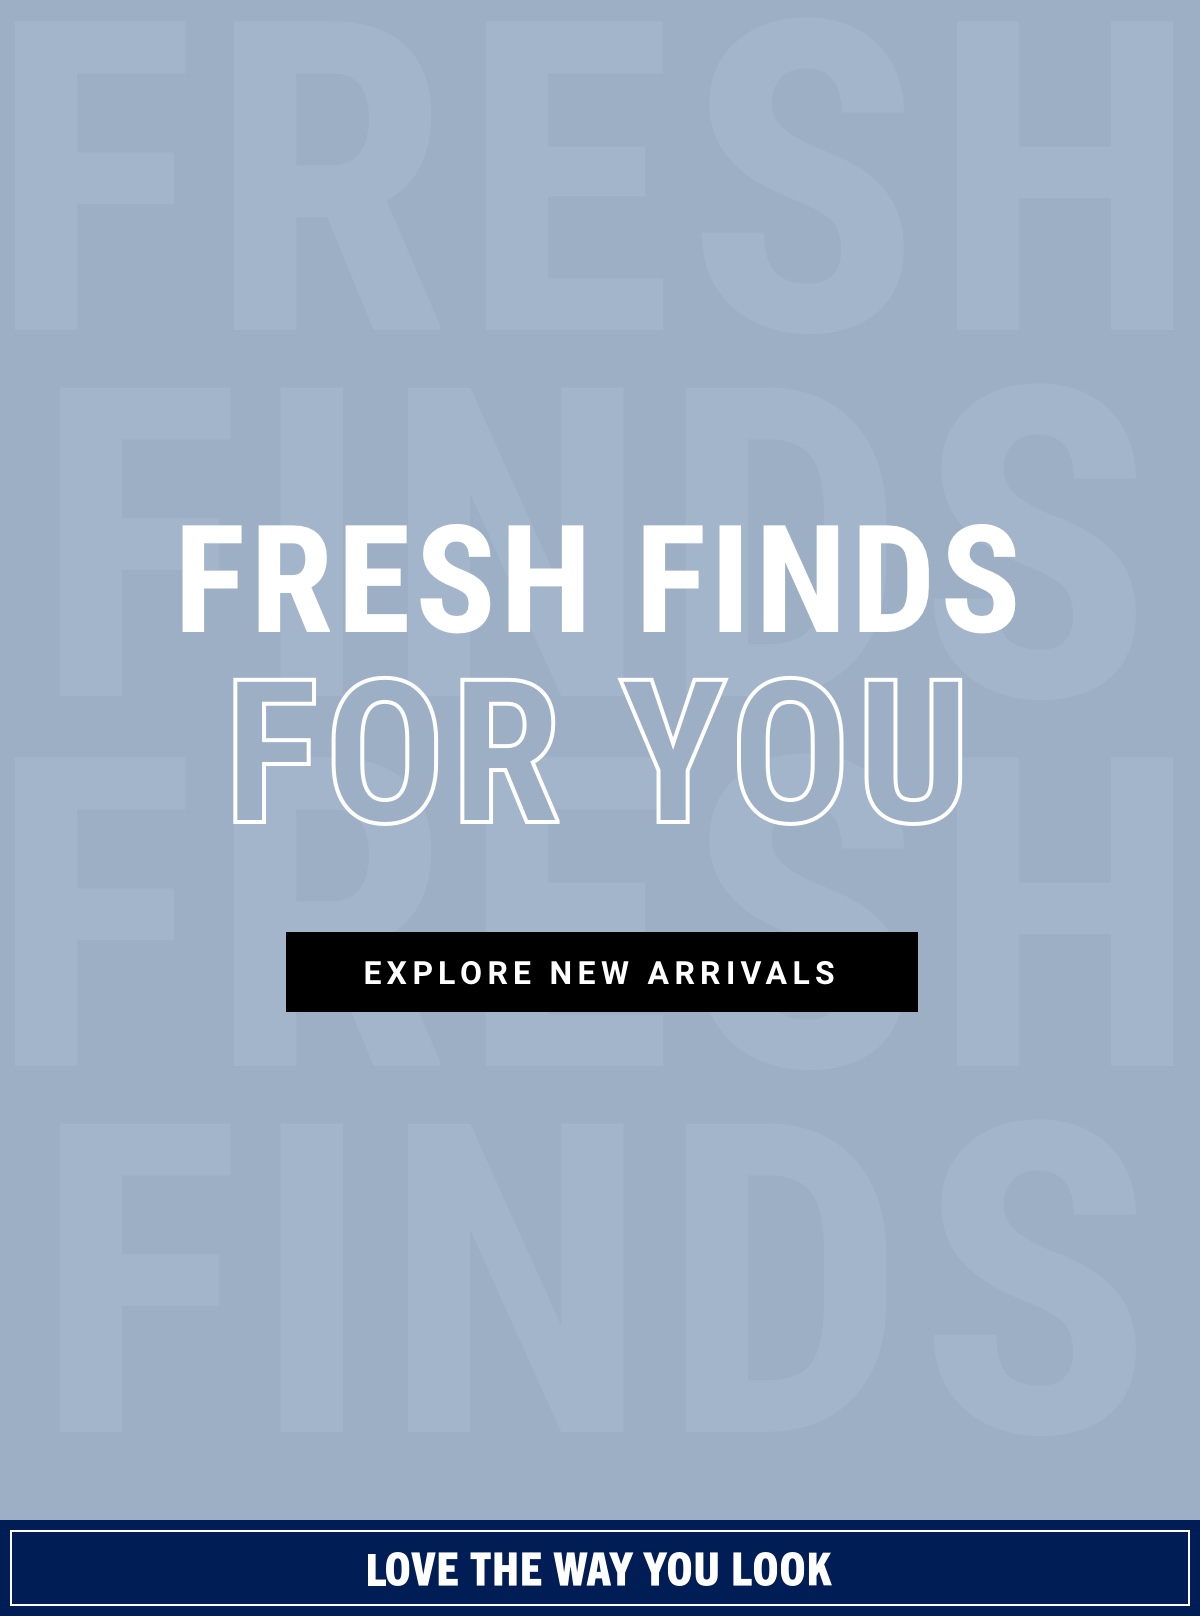 Fresh finds for you